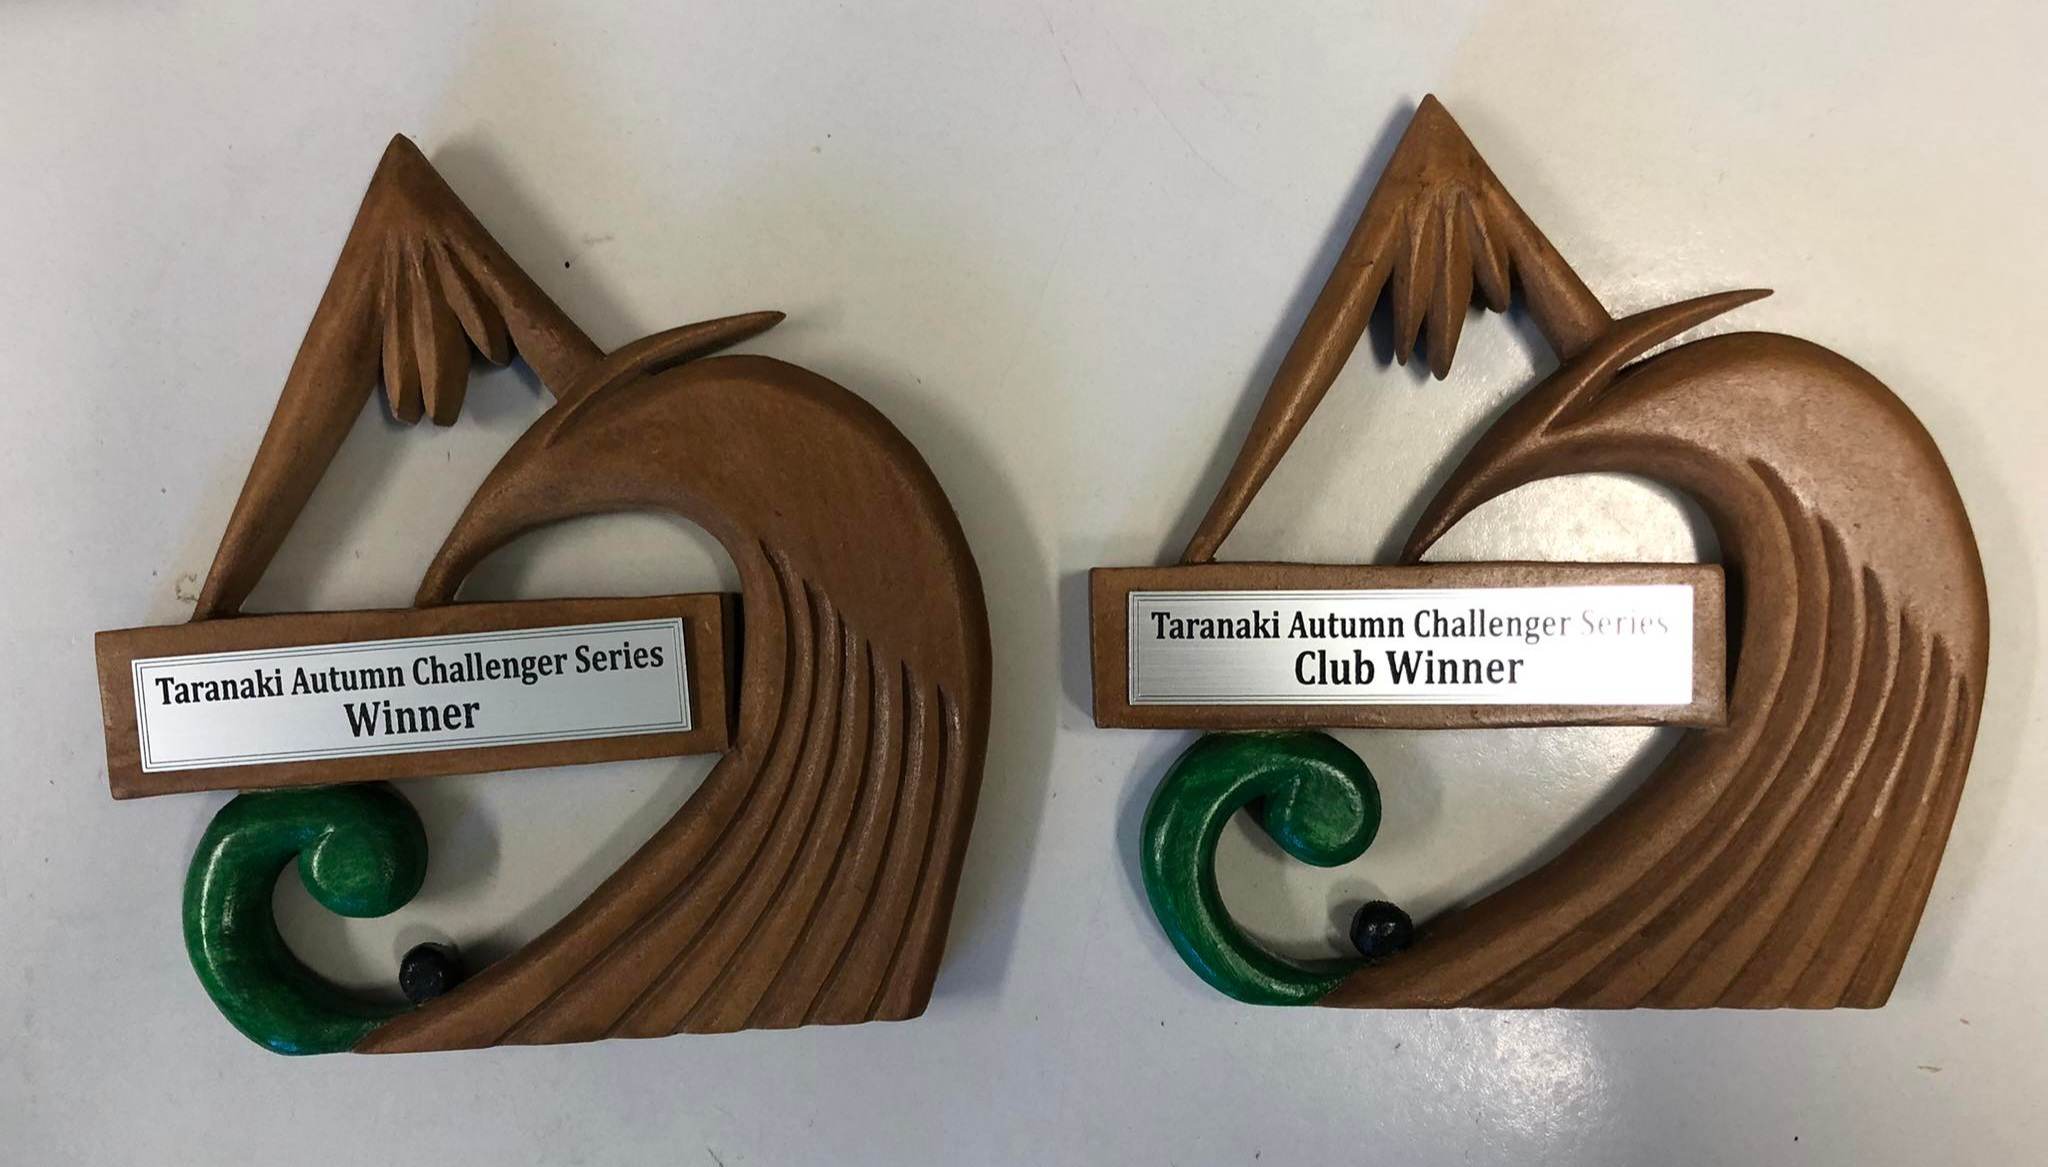 Trophies made and donated by Mike Davies